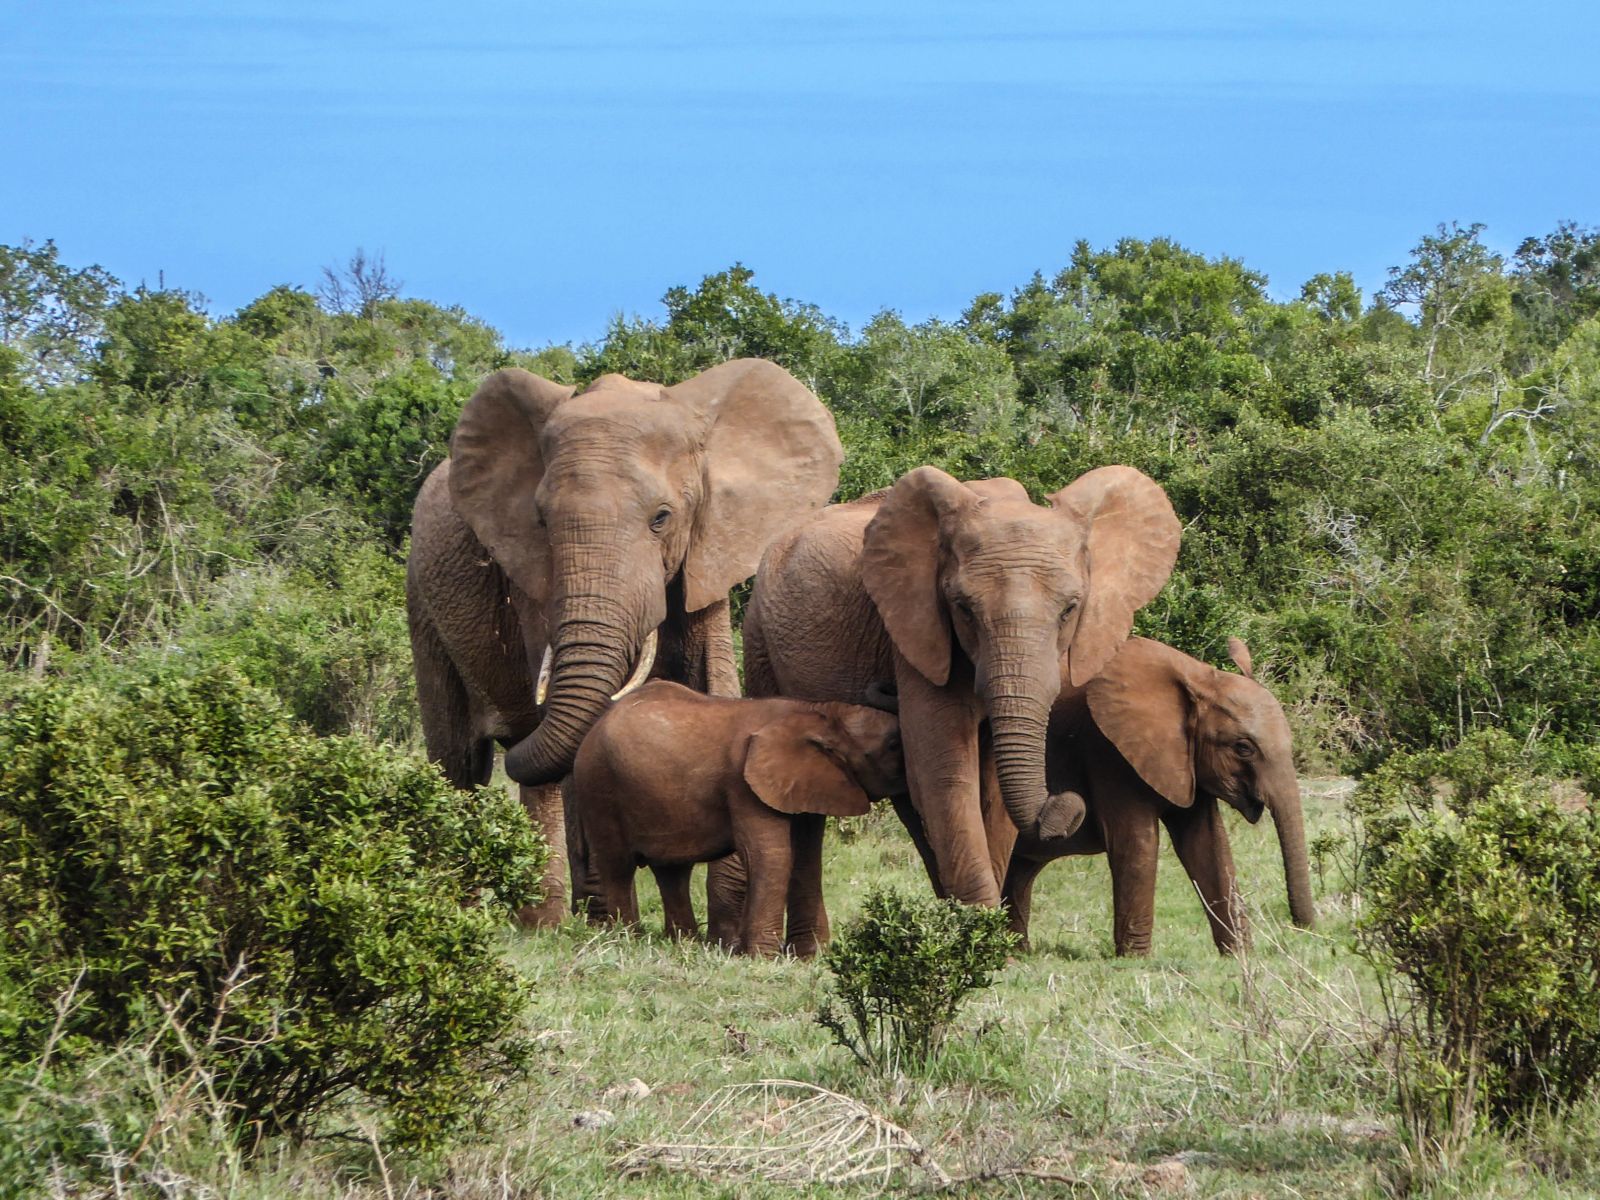 Family of elephants in a South African game reserve